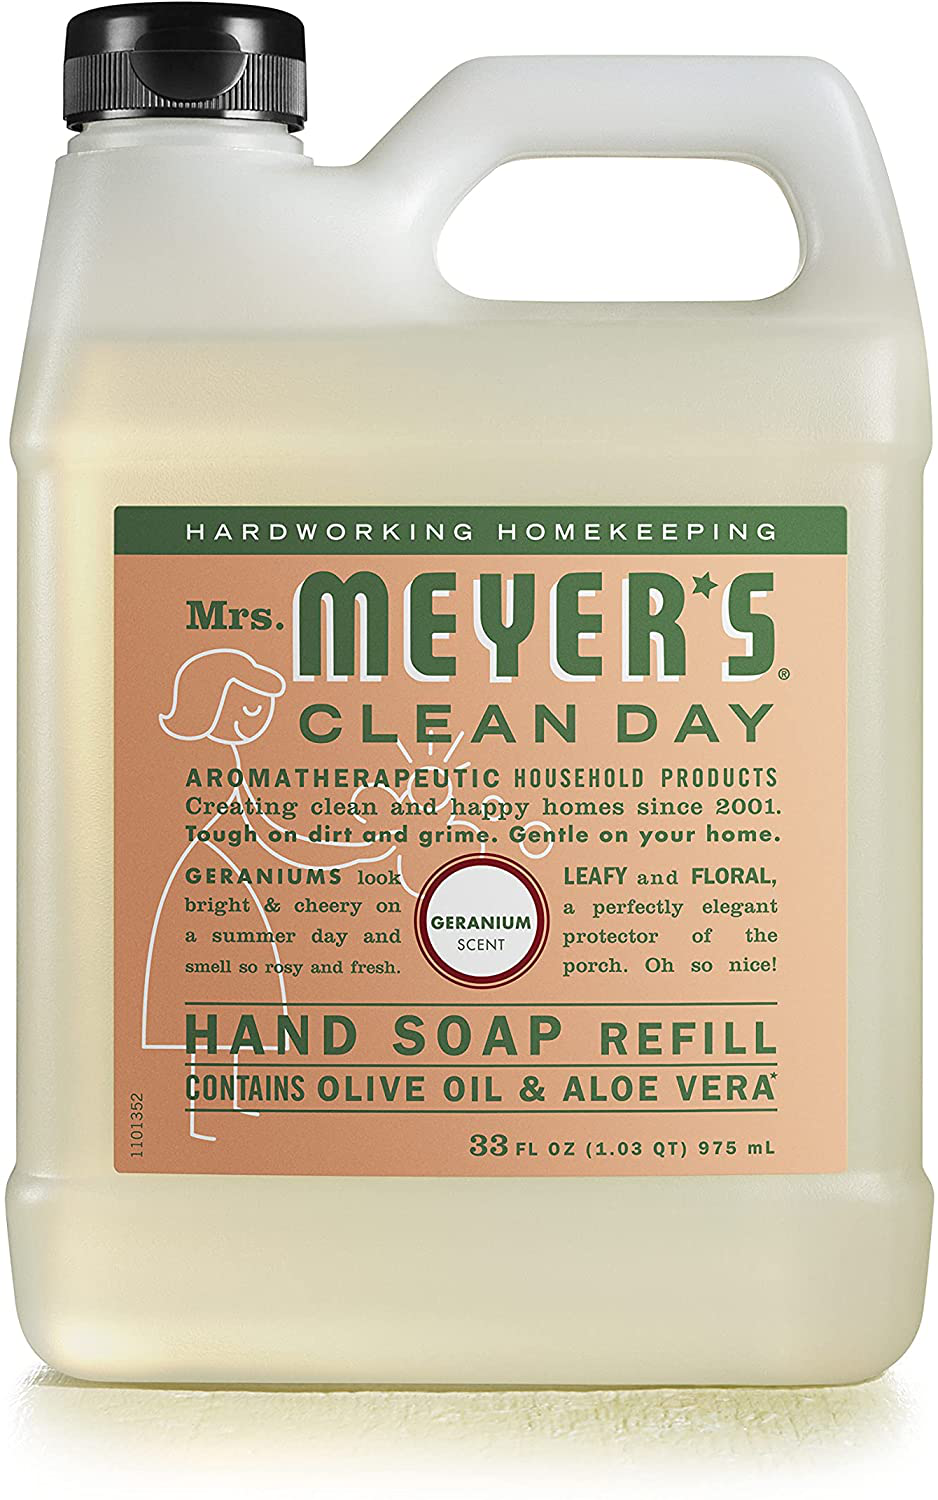 Mrs. Meyer's Clean Day Liquid Hand Soap Refill, Cruelty Free and Biodegradable Hand Wash Formula Made with Essential Oils, Geranium Scent, 33 oz